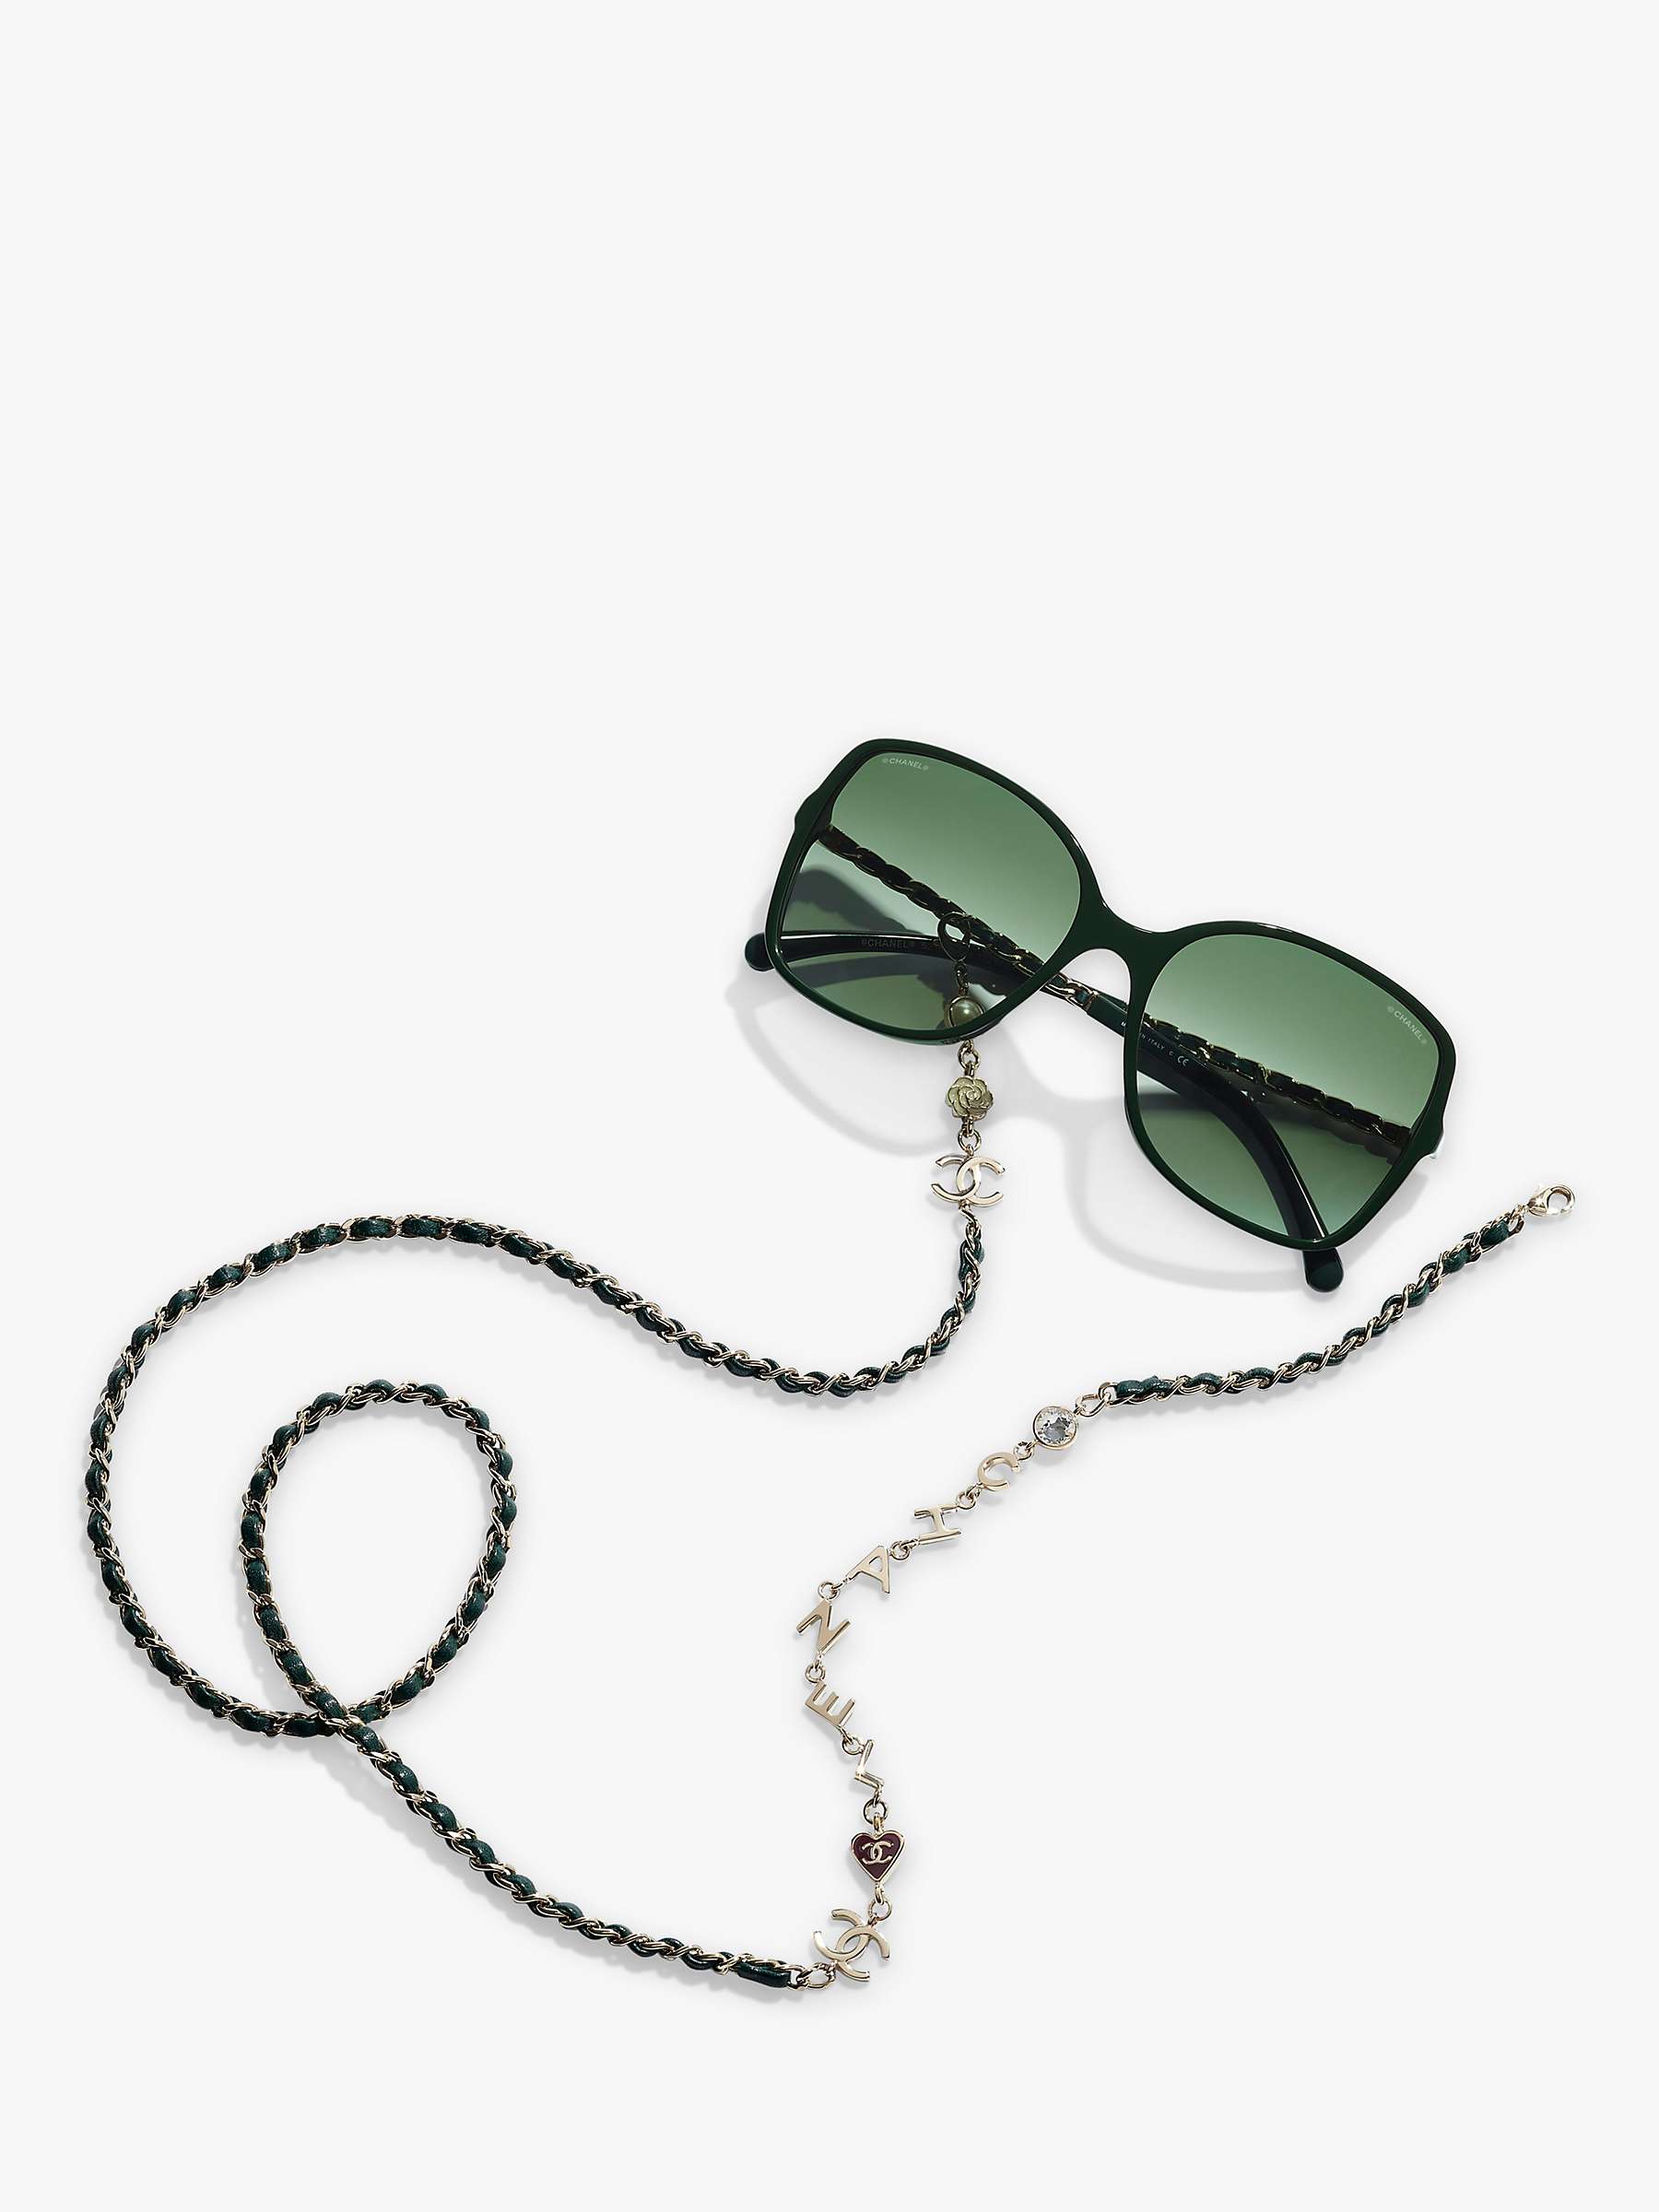 Buy CHANEL Square Sunglasses CH5210Q Green Online at johnlewis.com